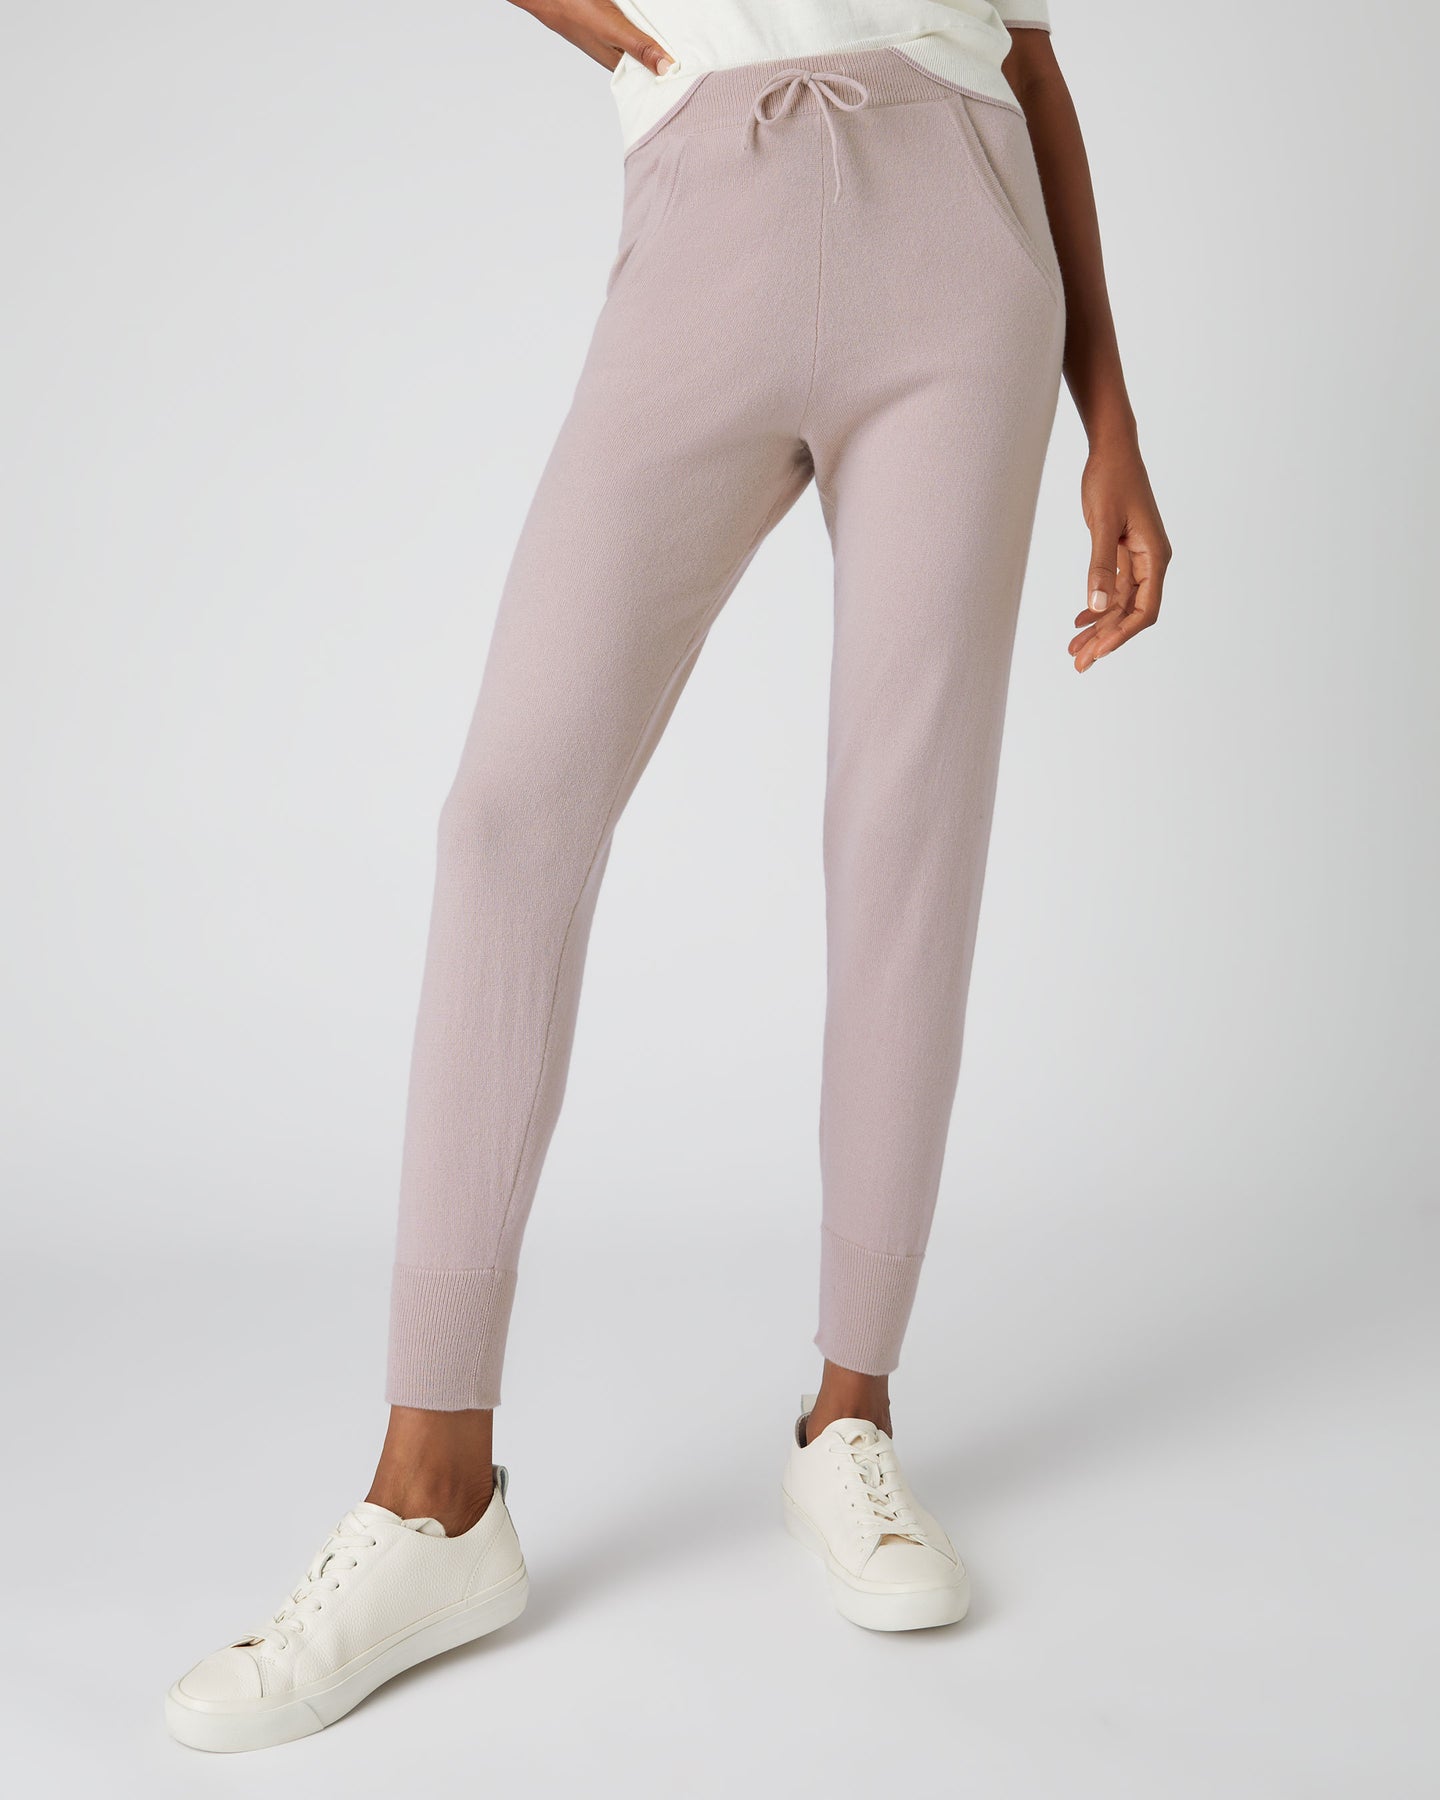 Buy Women's Cashmere Lounge Pants Online | Everyday Cashmere